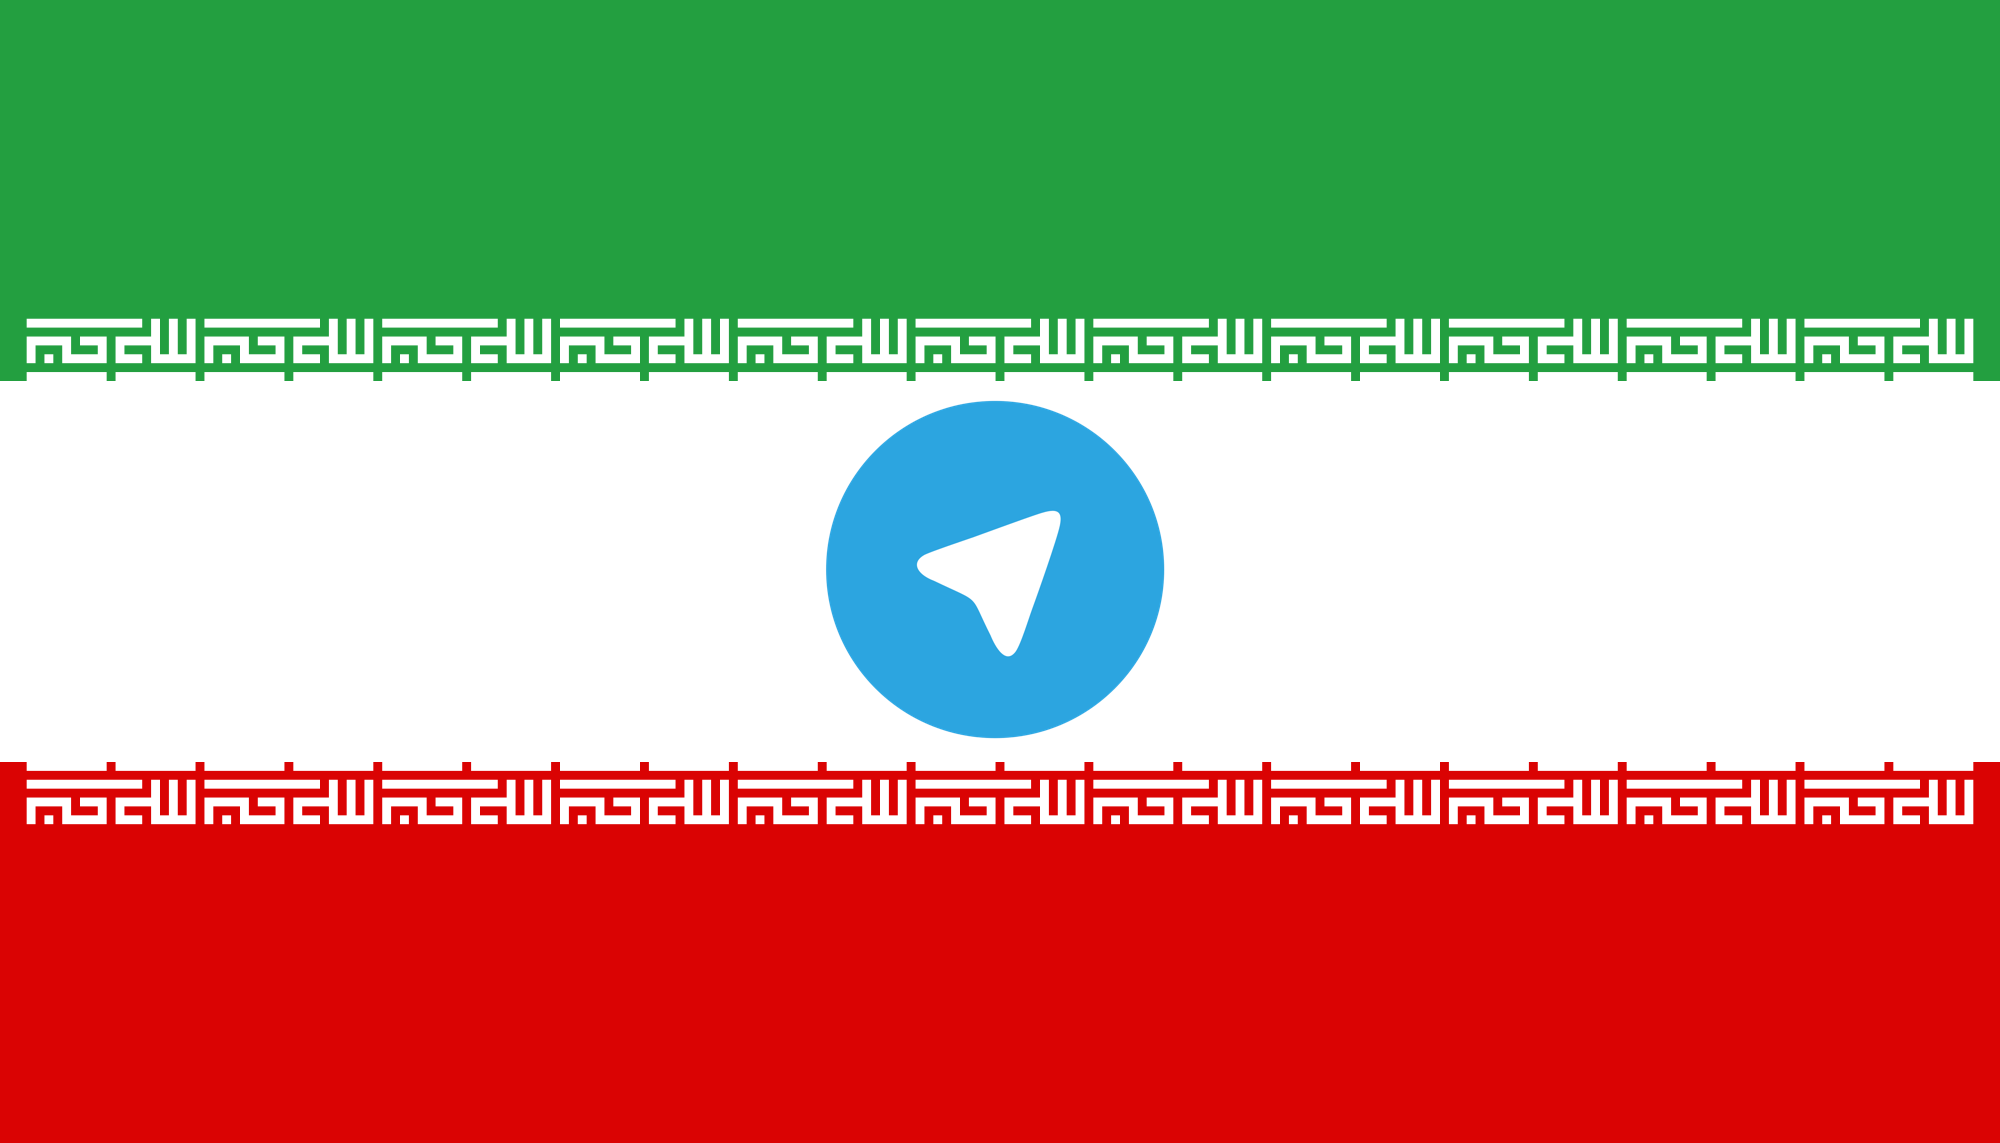 The Iranian government has announced plans to regulate social media channels with more than 5000 followers. As the largest social network application in Iran, this is thought to directly effect Telegram. 